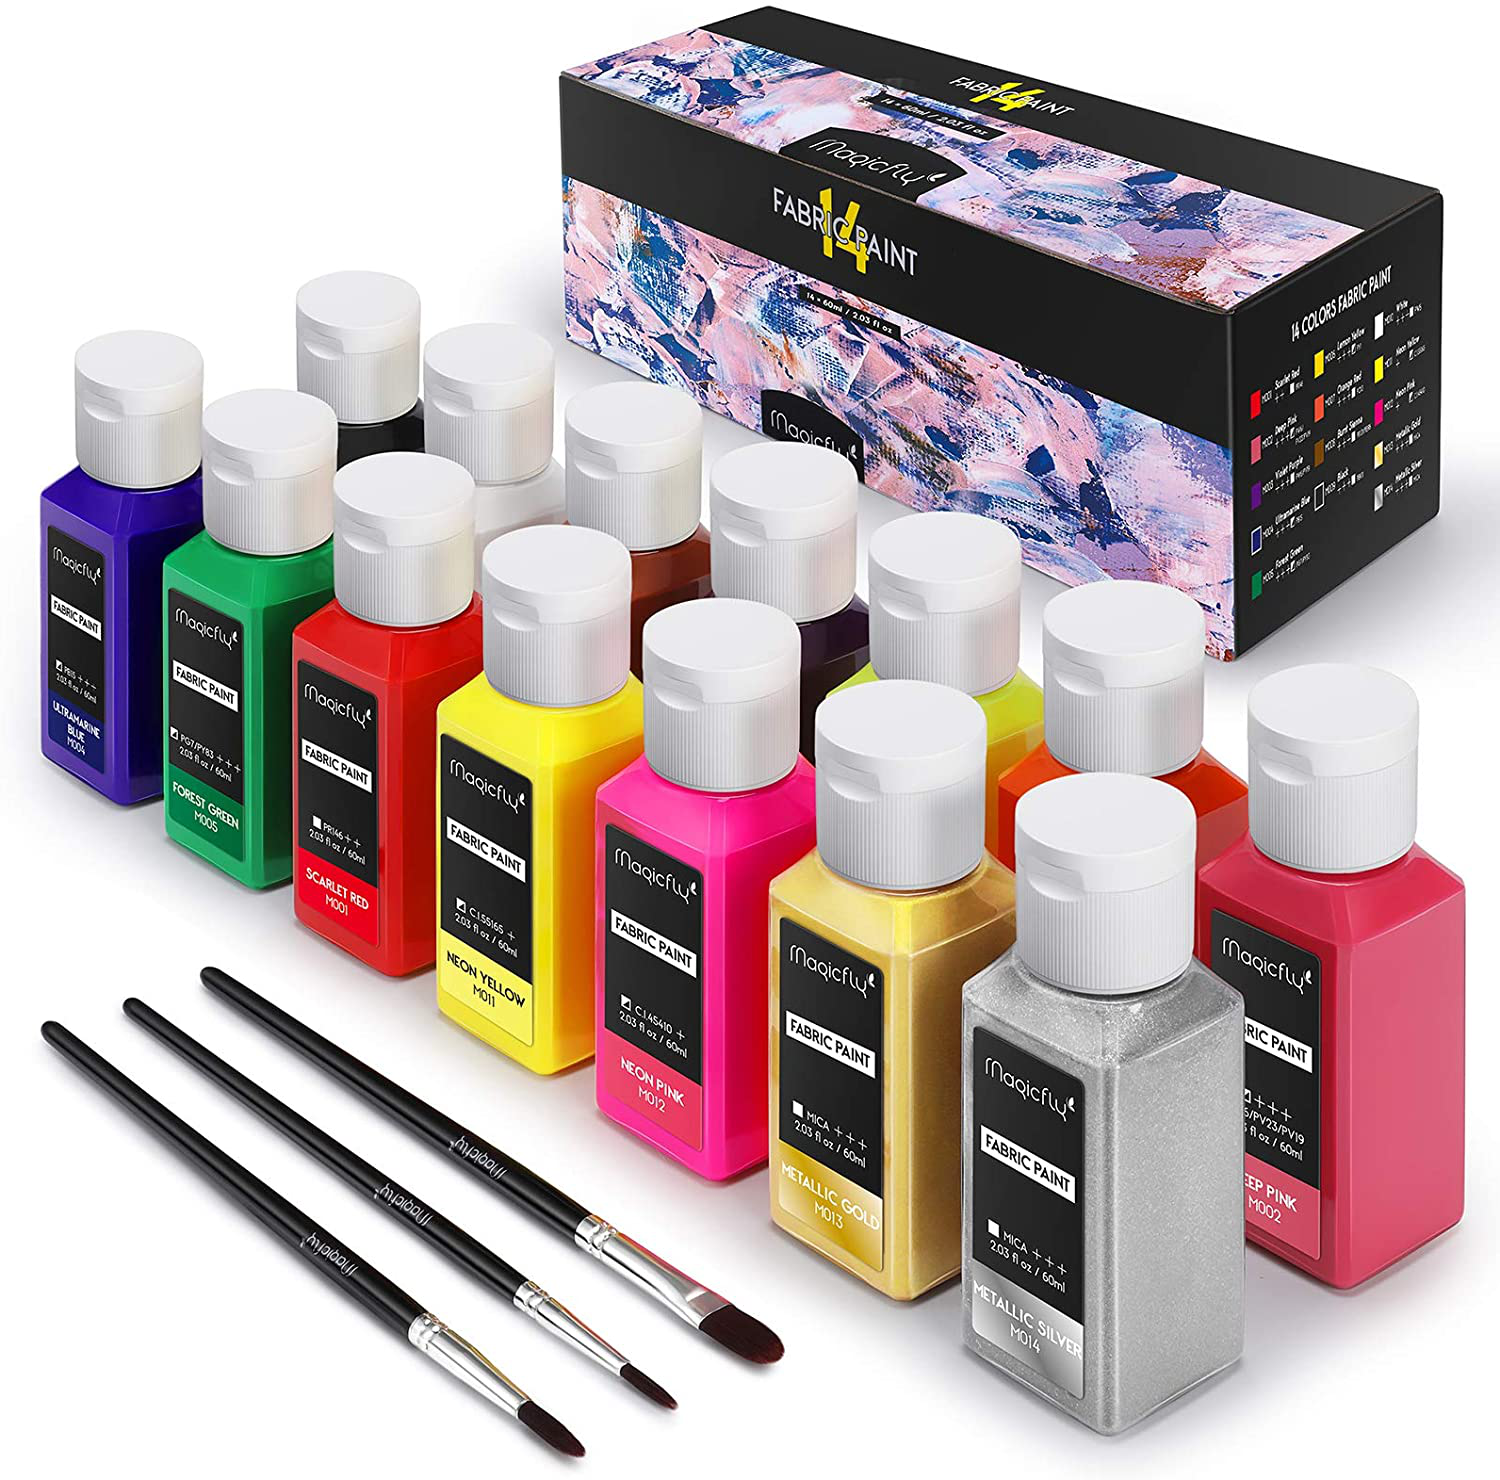 Magicfly Permanent Soft Fabric Paint Set Textile Paints with 3 Brushes, No Heating Needed & Washable Fabric Paint for All DIY Projects